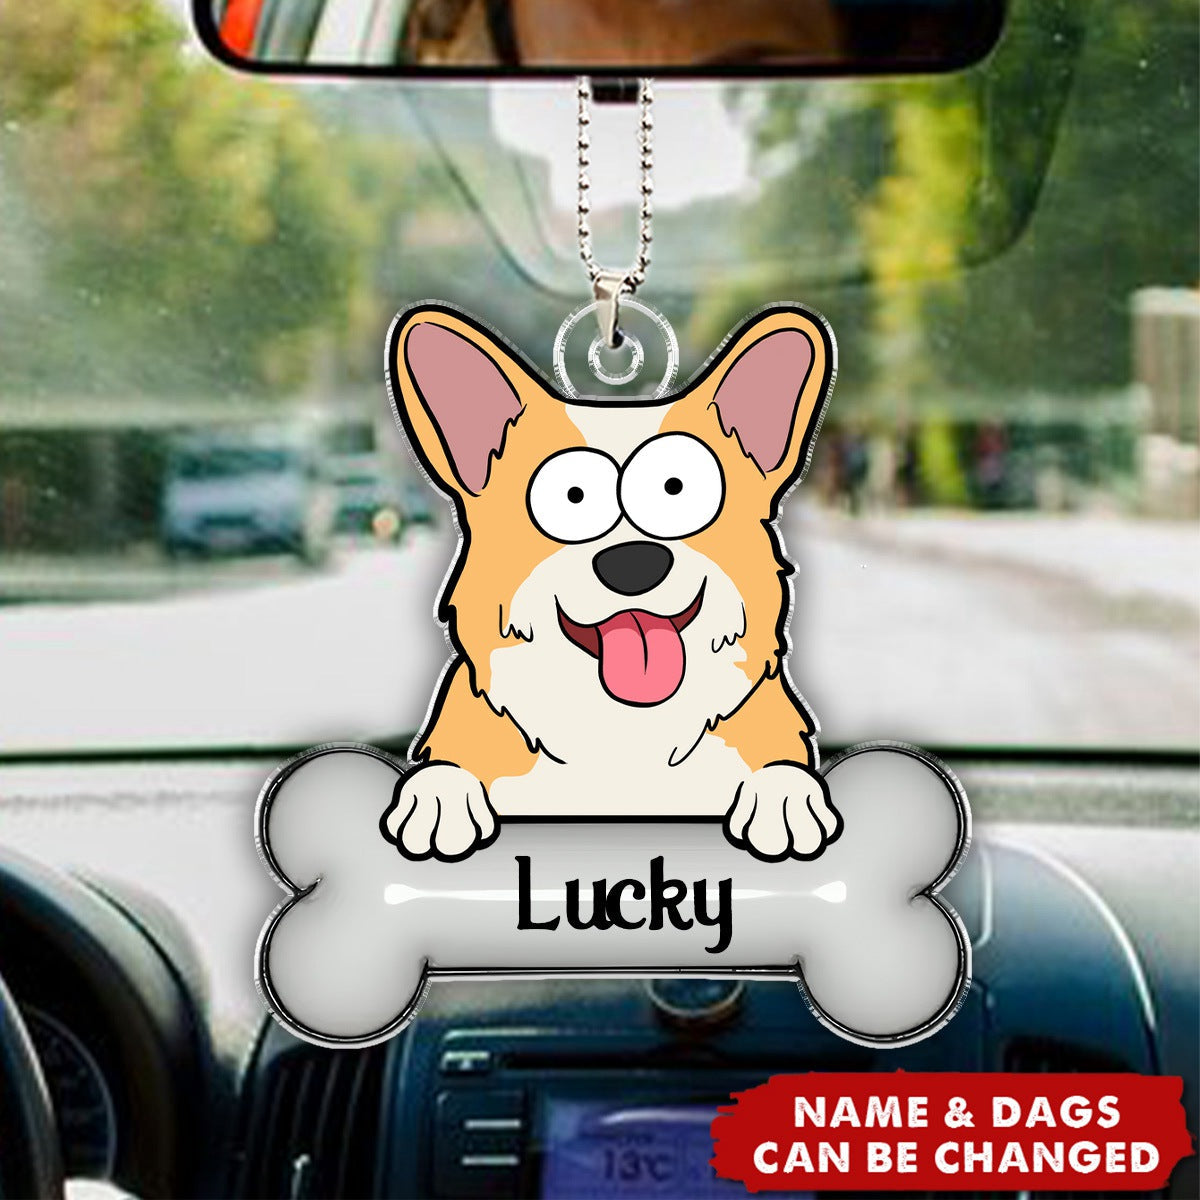 My Dog Ornament - Personalized Car Ornament - Gift For Dog Owner, Dog Lover